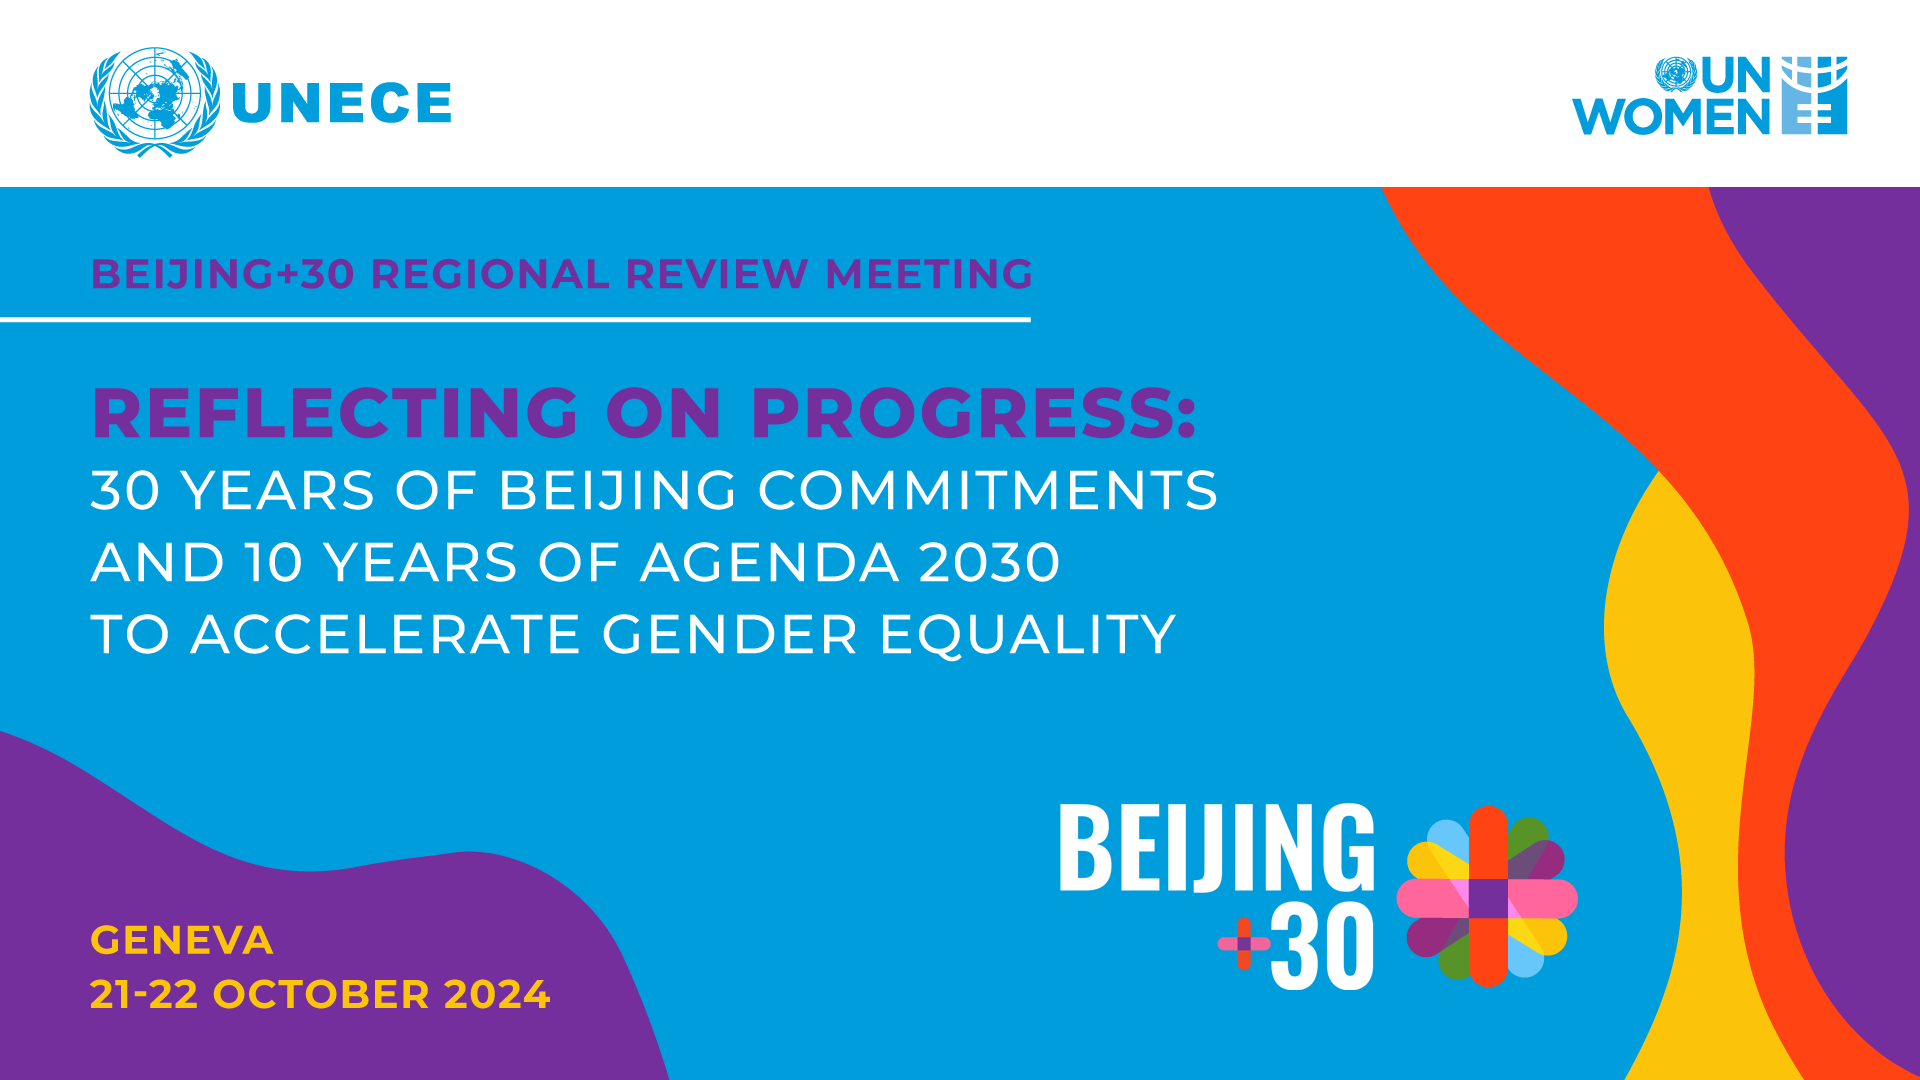 Beijing+30 Regional Review Meeting “Reviewing 30 Years of Beijing Commitments to Accelerate Gender Equality in the ECE Region”